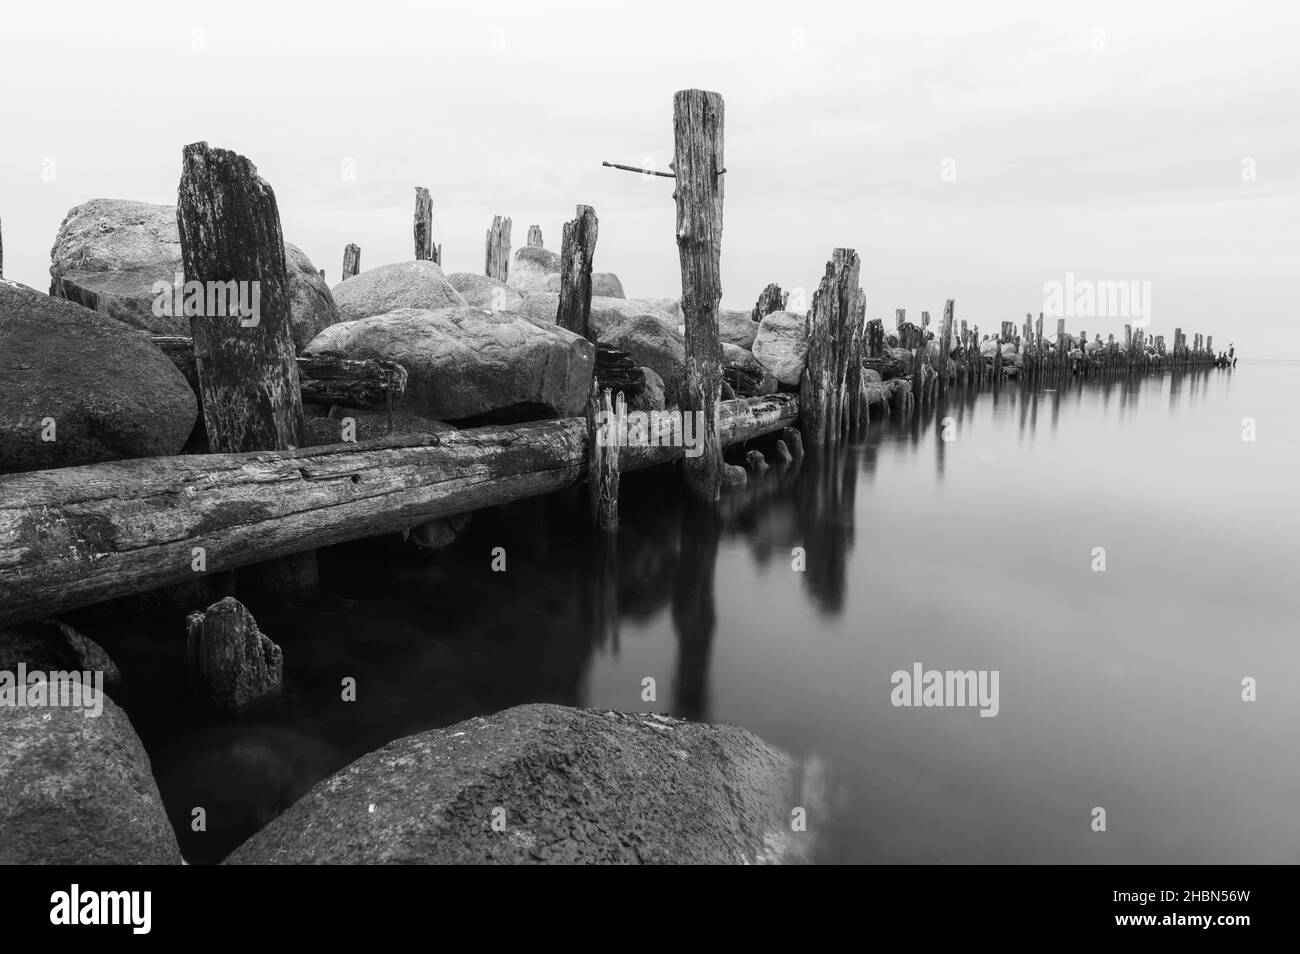 an old pier made of stones and wooden legs is left with metal screeds and the water surface is calm Stock Photo